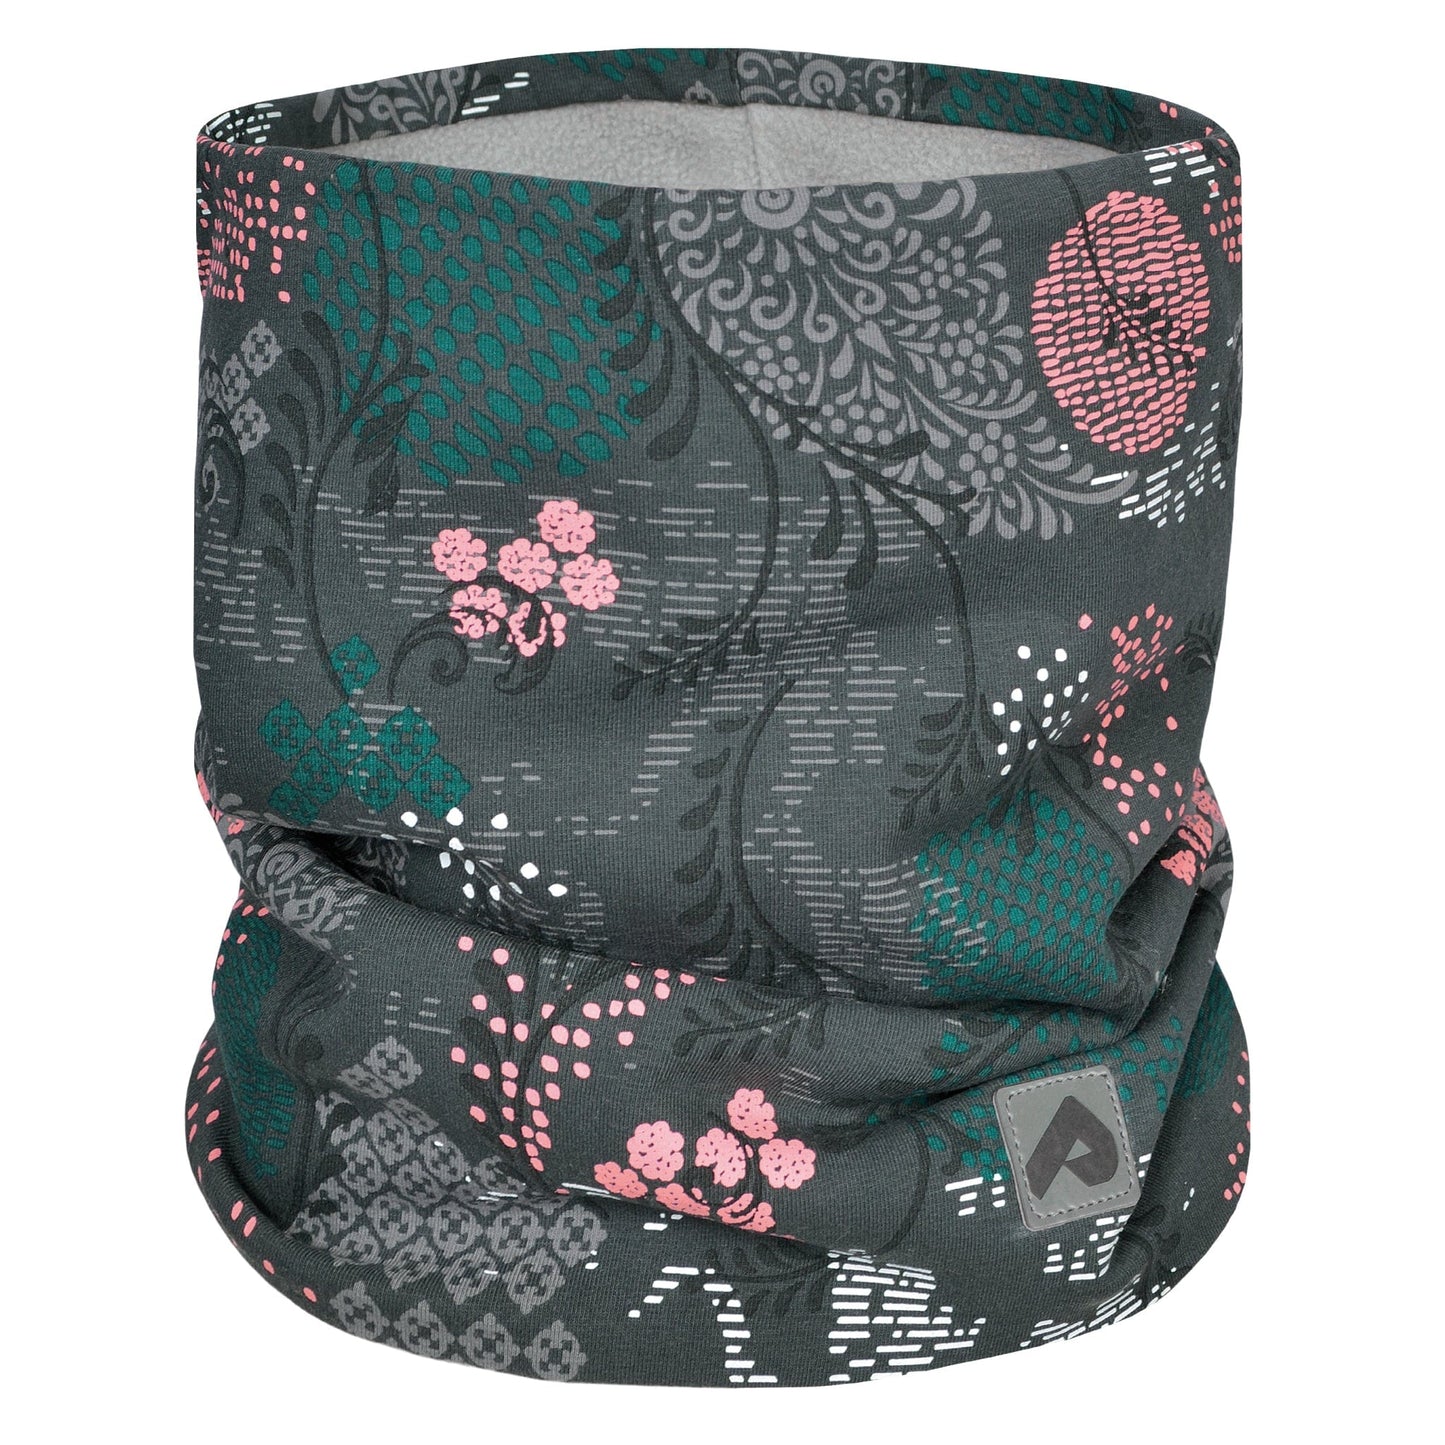 Cotton neck warmer with fleece lining - Flore